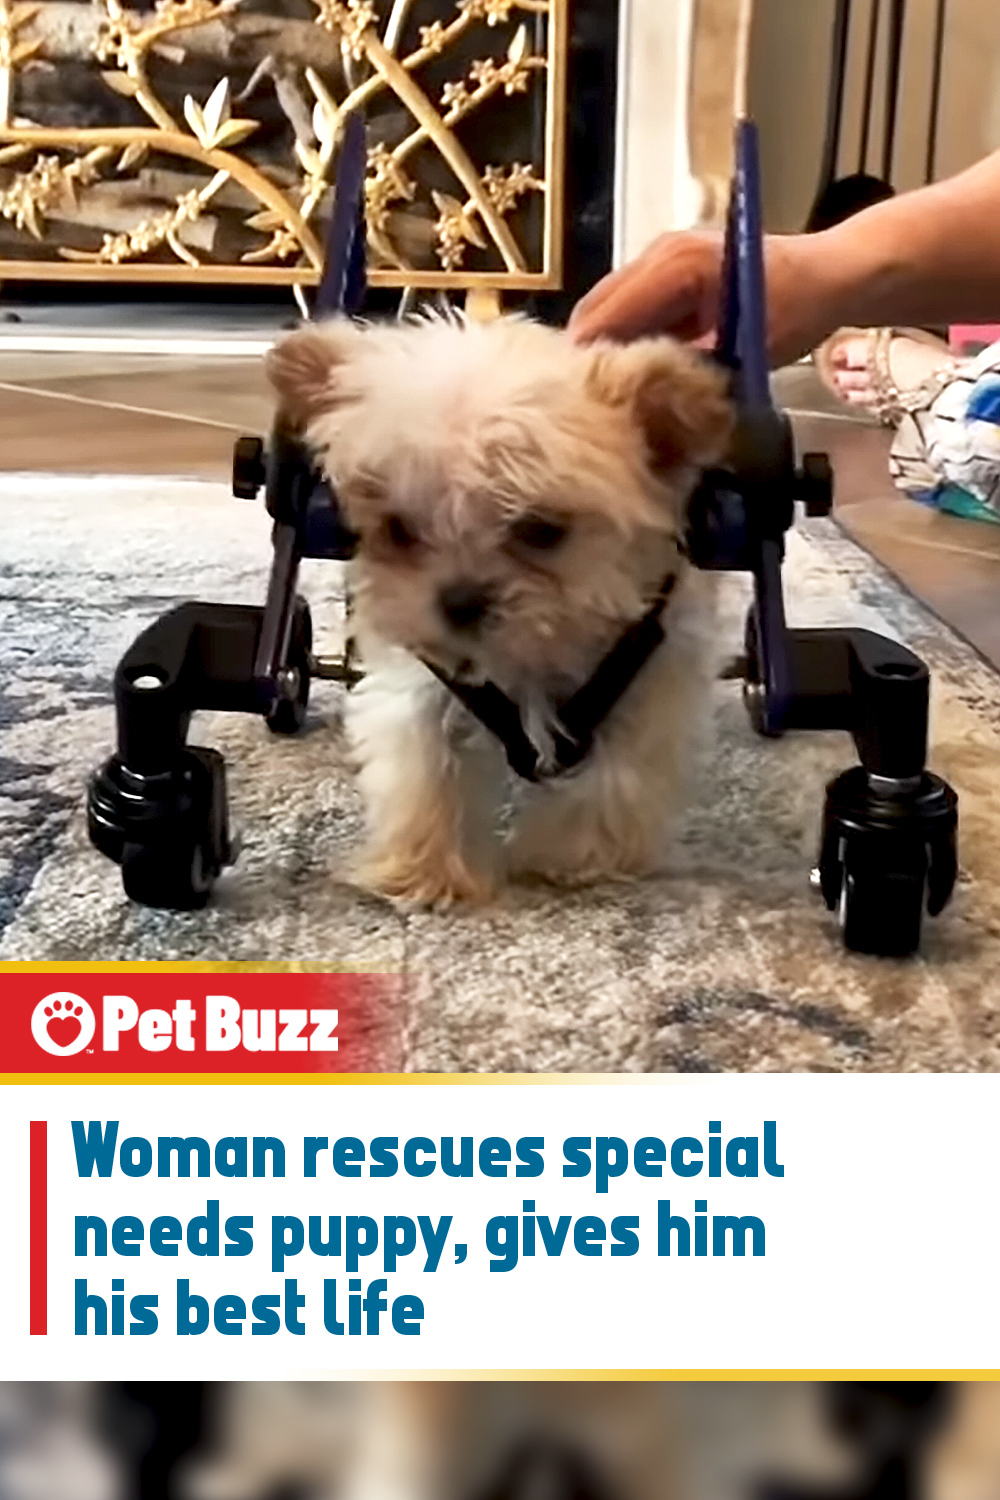 Woman rescues special needs puppy, gives him his best life